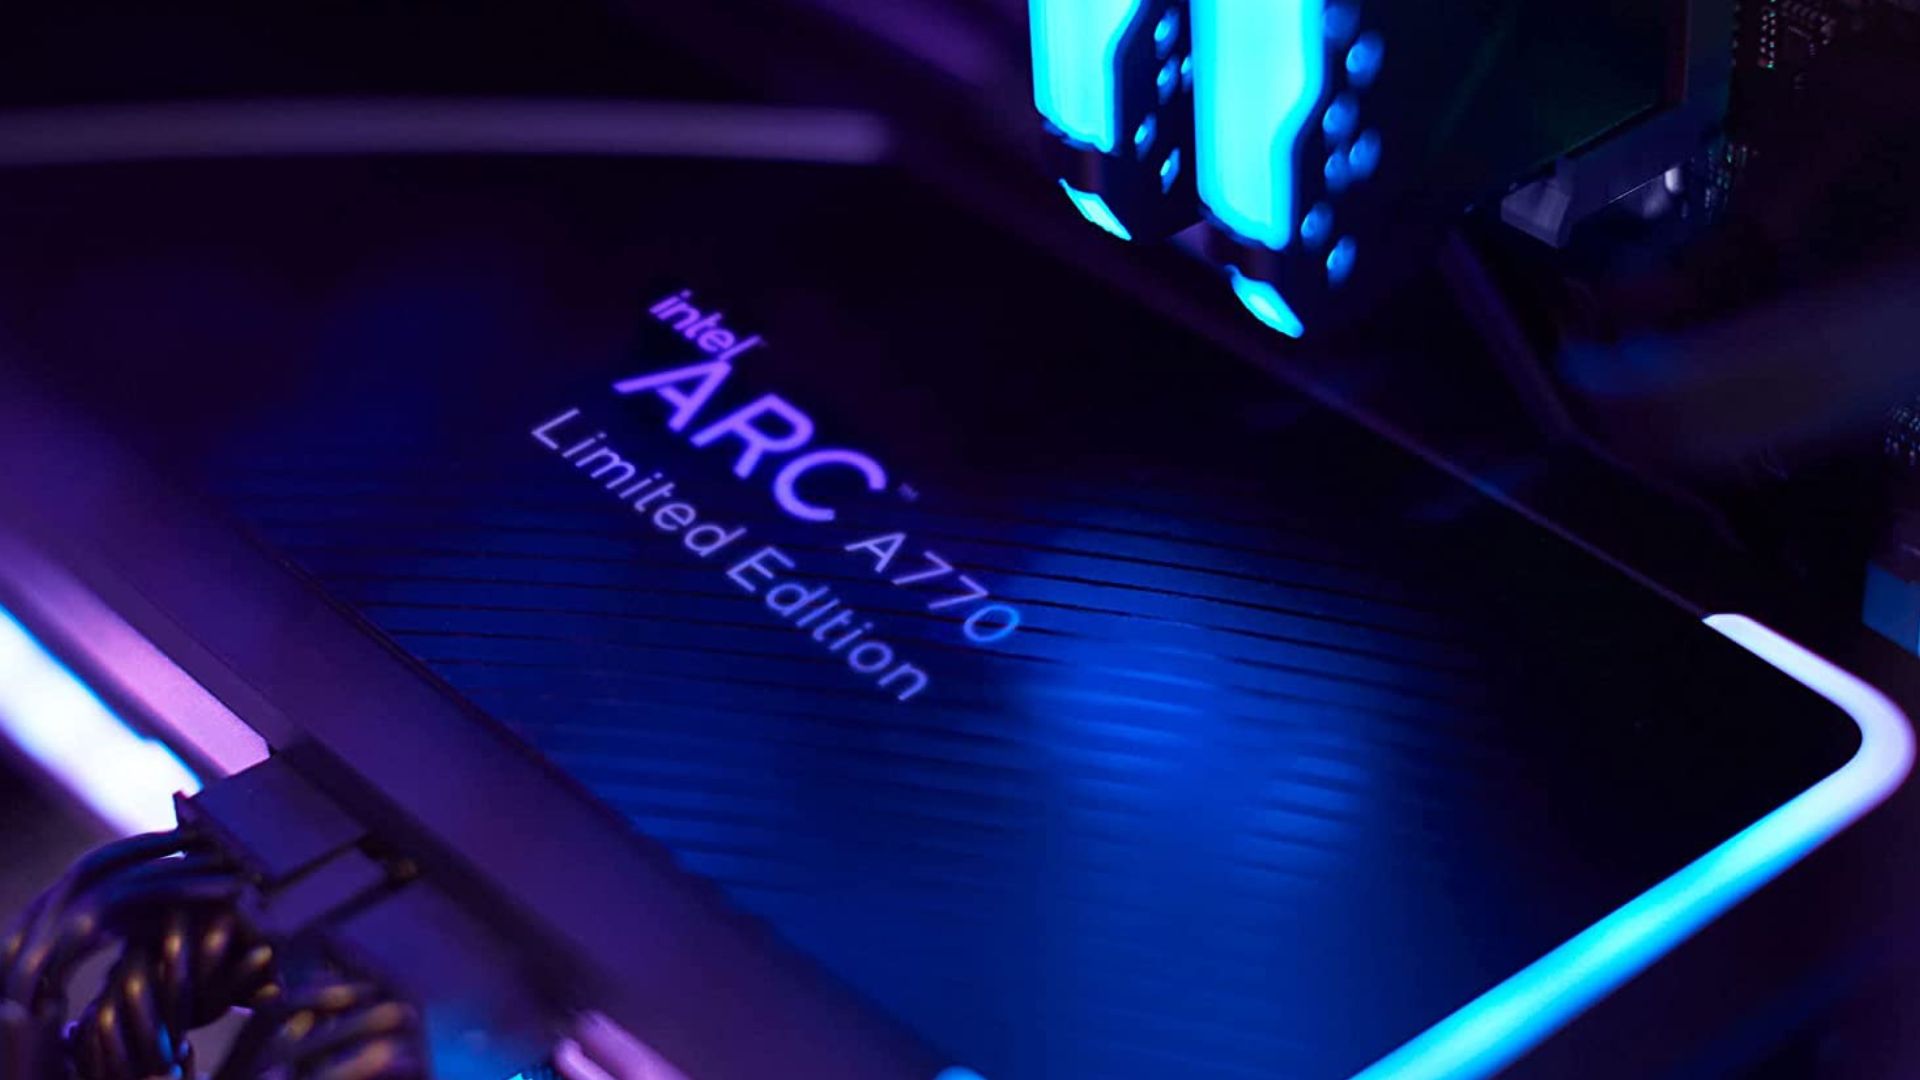 Intel Arc A770 limited edition up close in a gaming pc